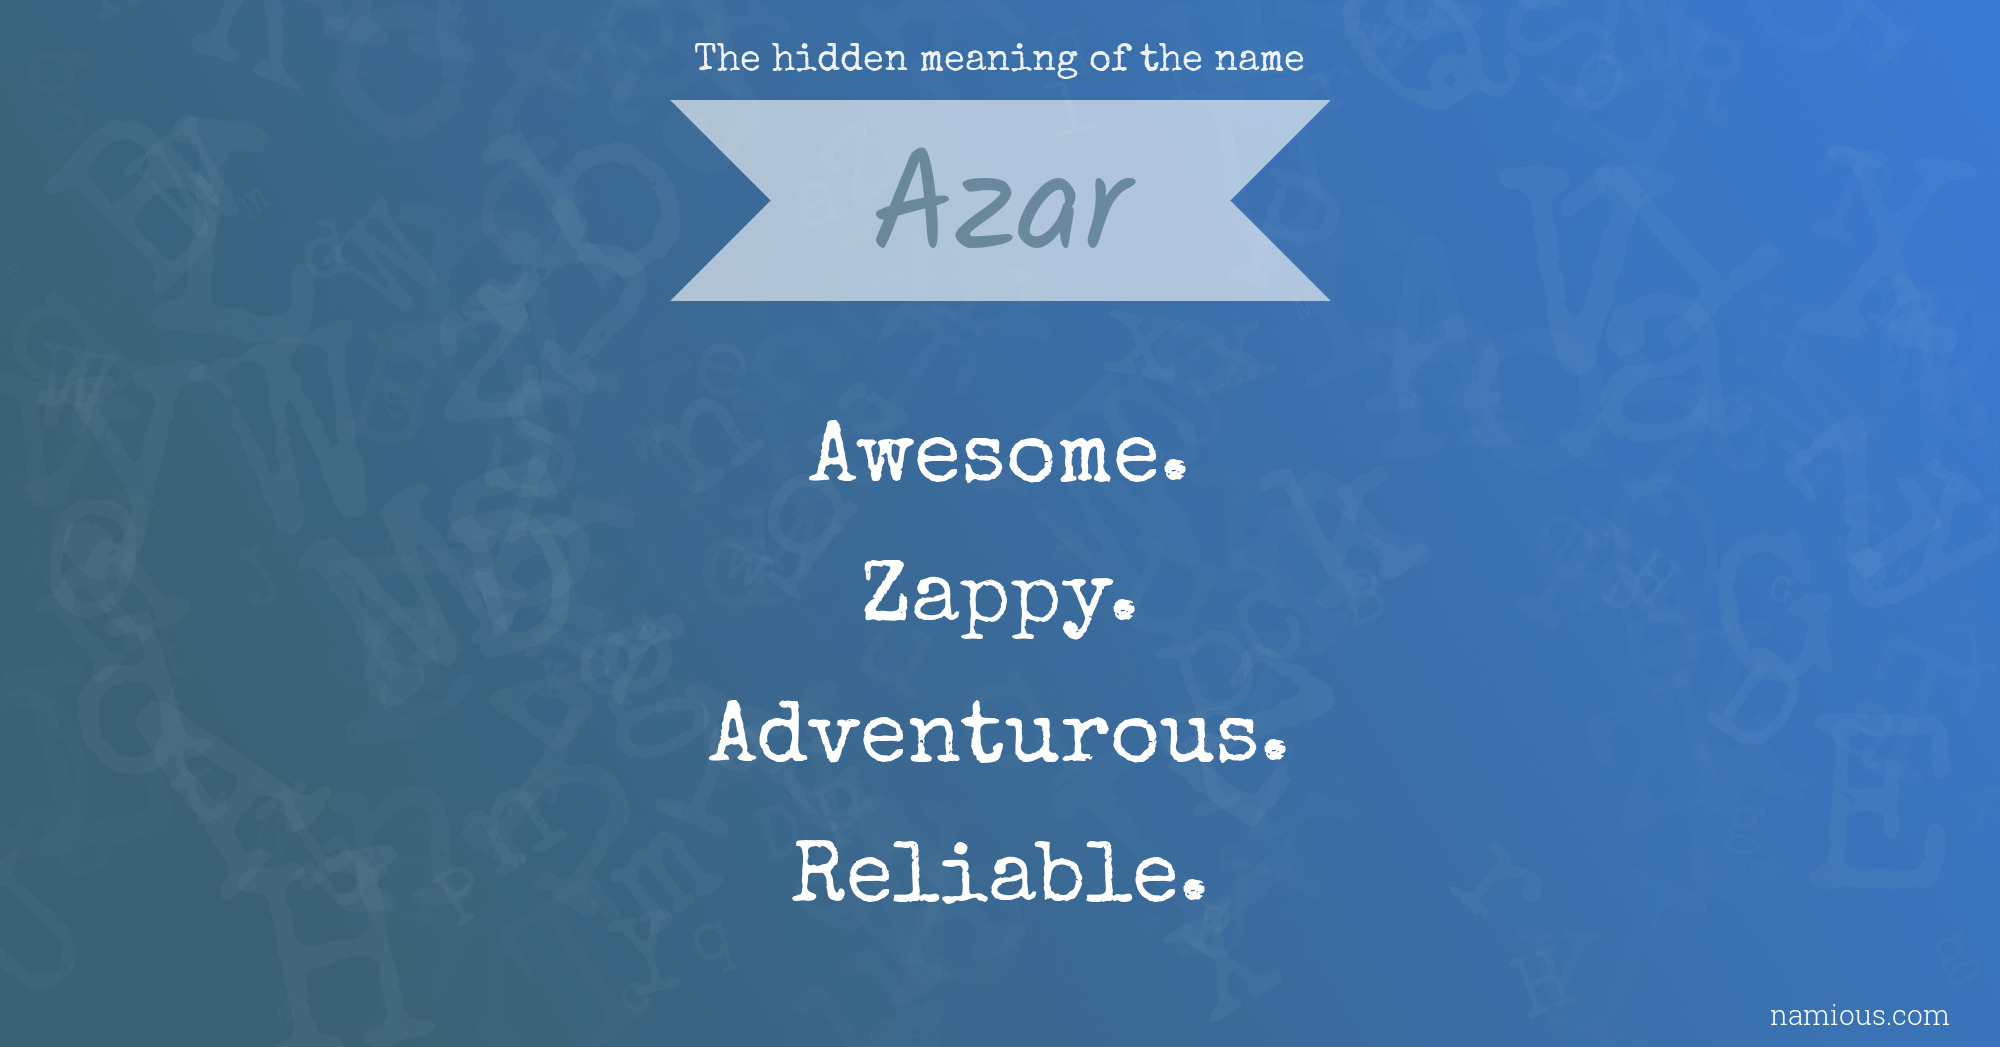 The hidden meaning of the name Azar